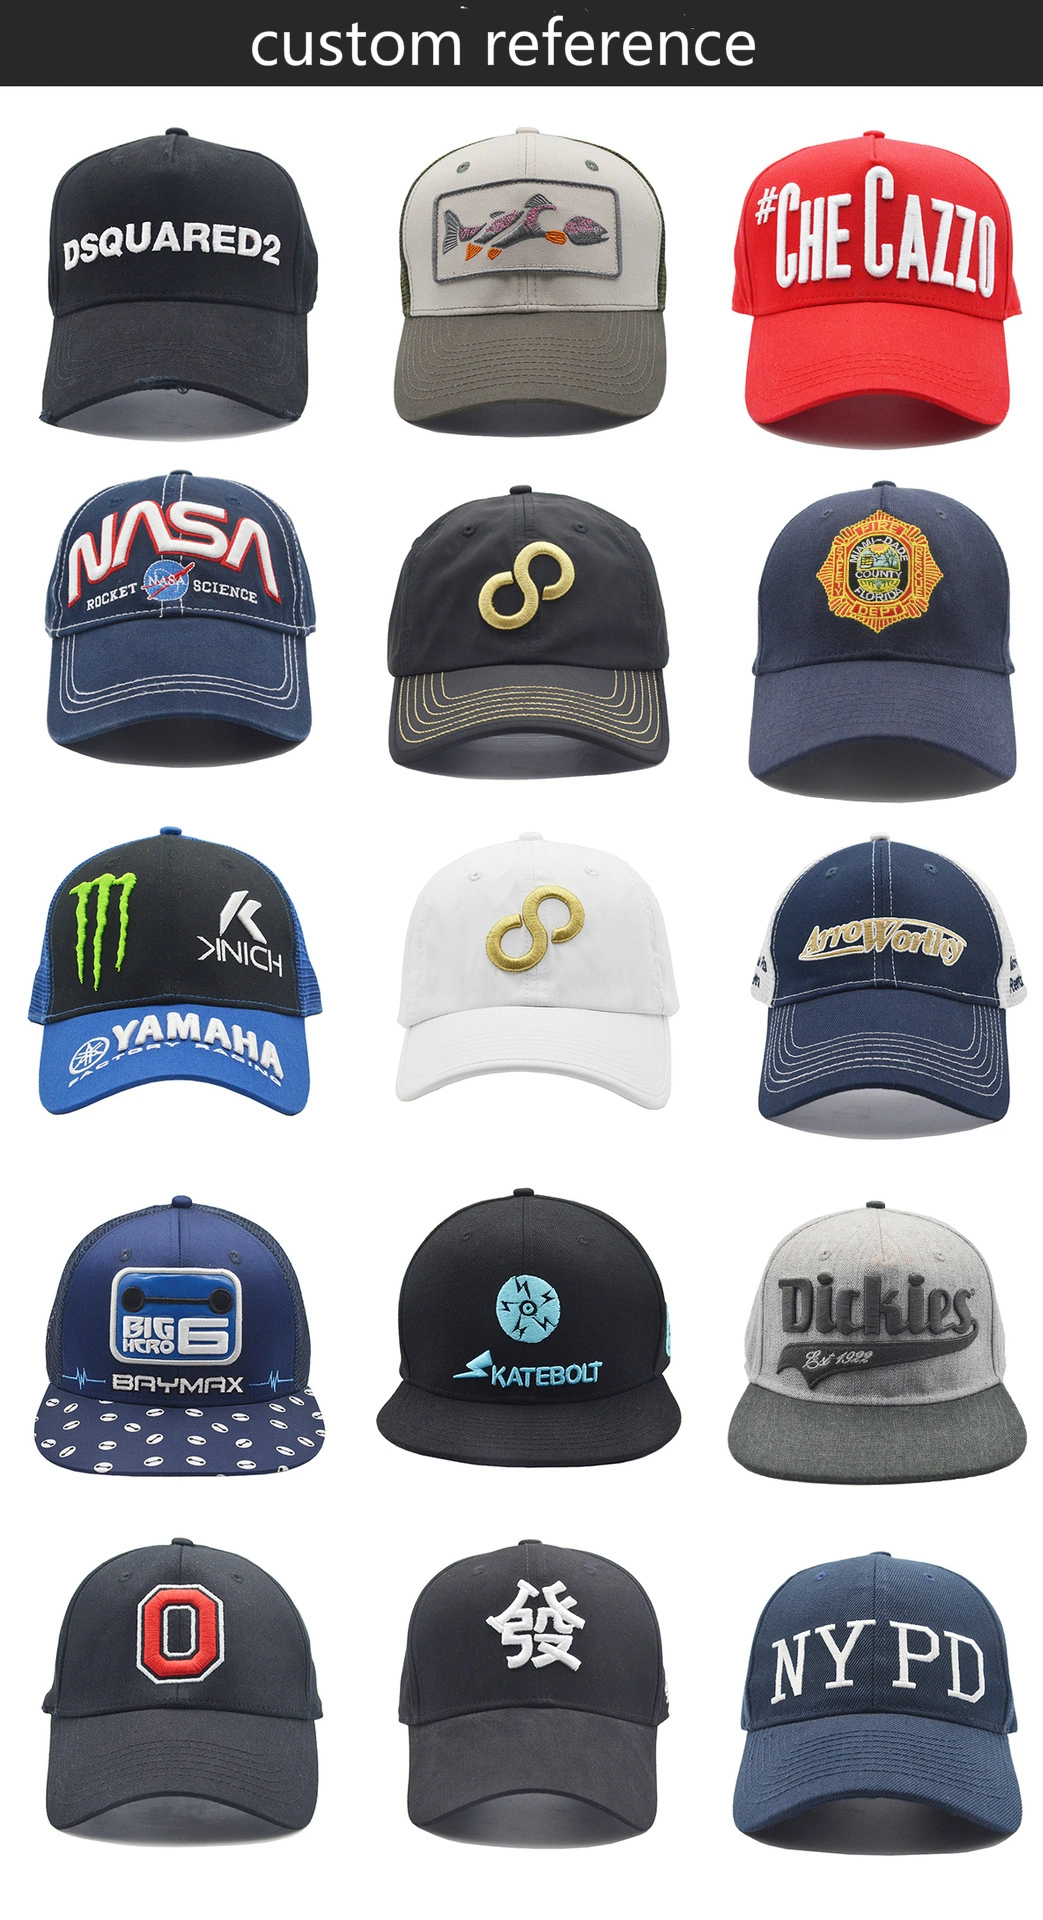 Promotional Gift Branded 6 Panel Dry Fit Material Baseball Caps with Heat Transfer Printed